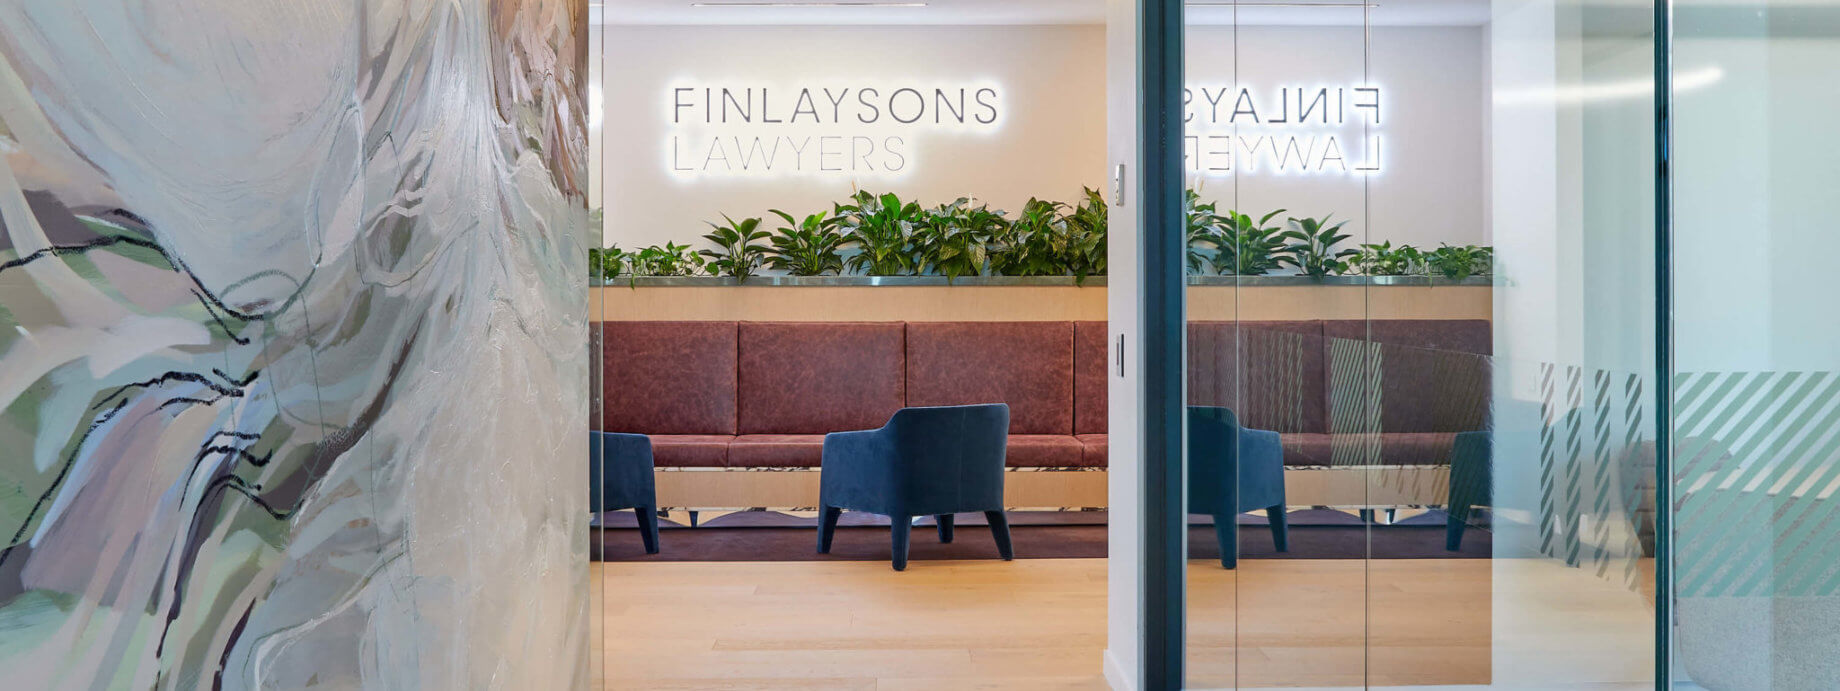 Finlaysons Adelaide Office reception space